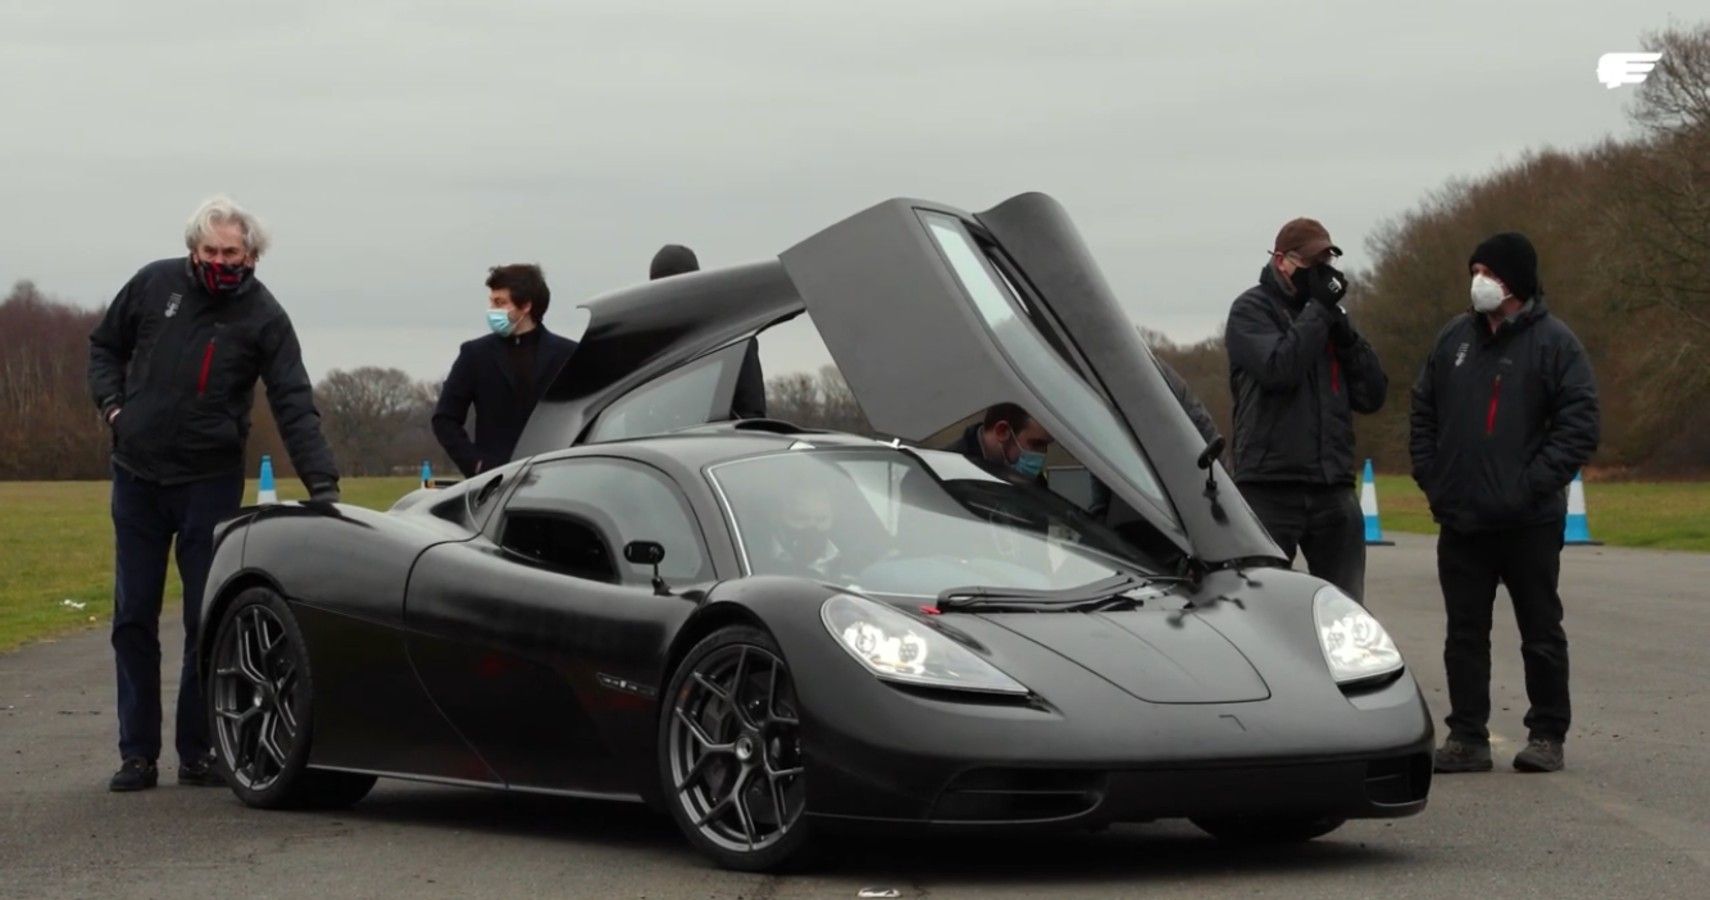 The successor to the McLaren F1 looks and sounds great, even at low speed